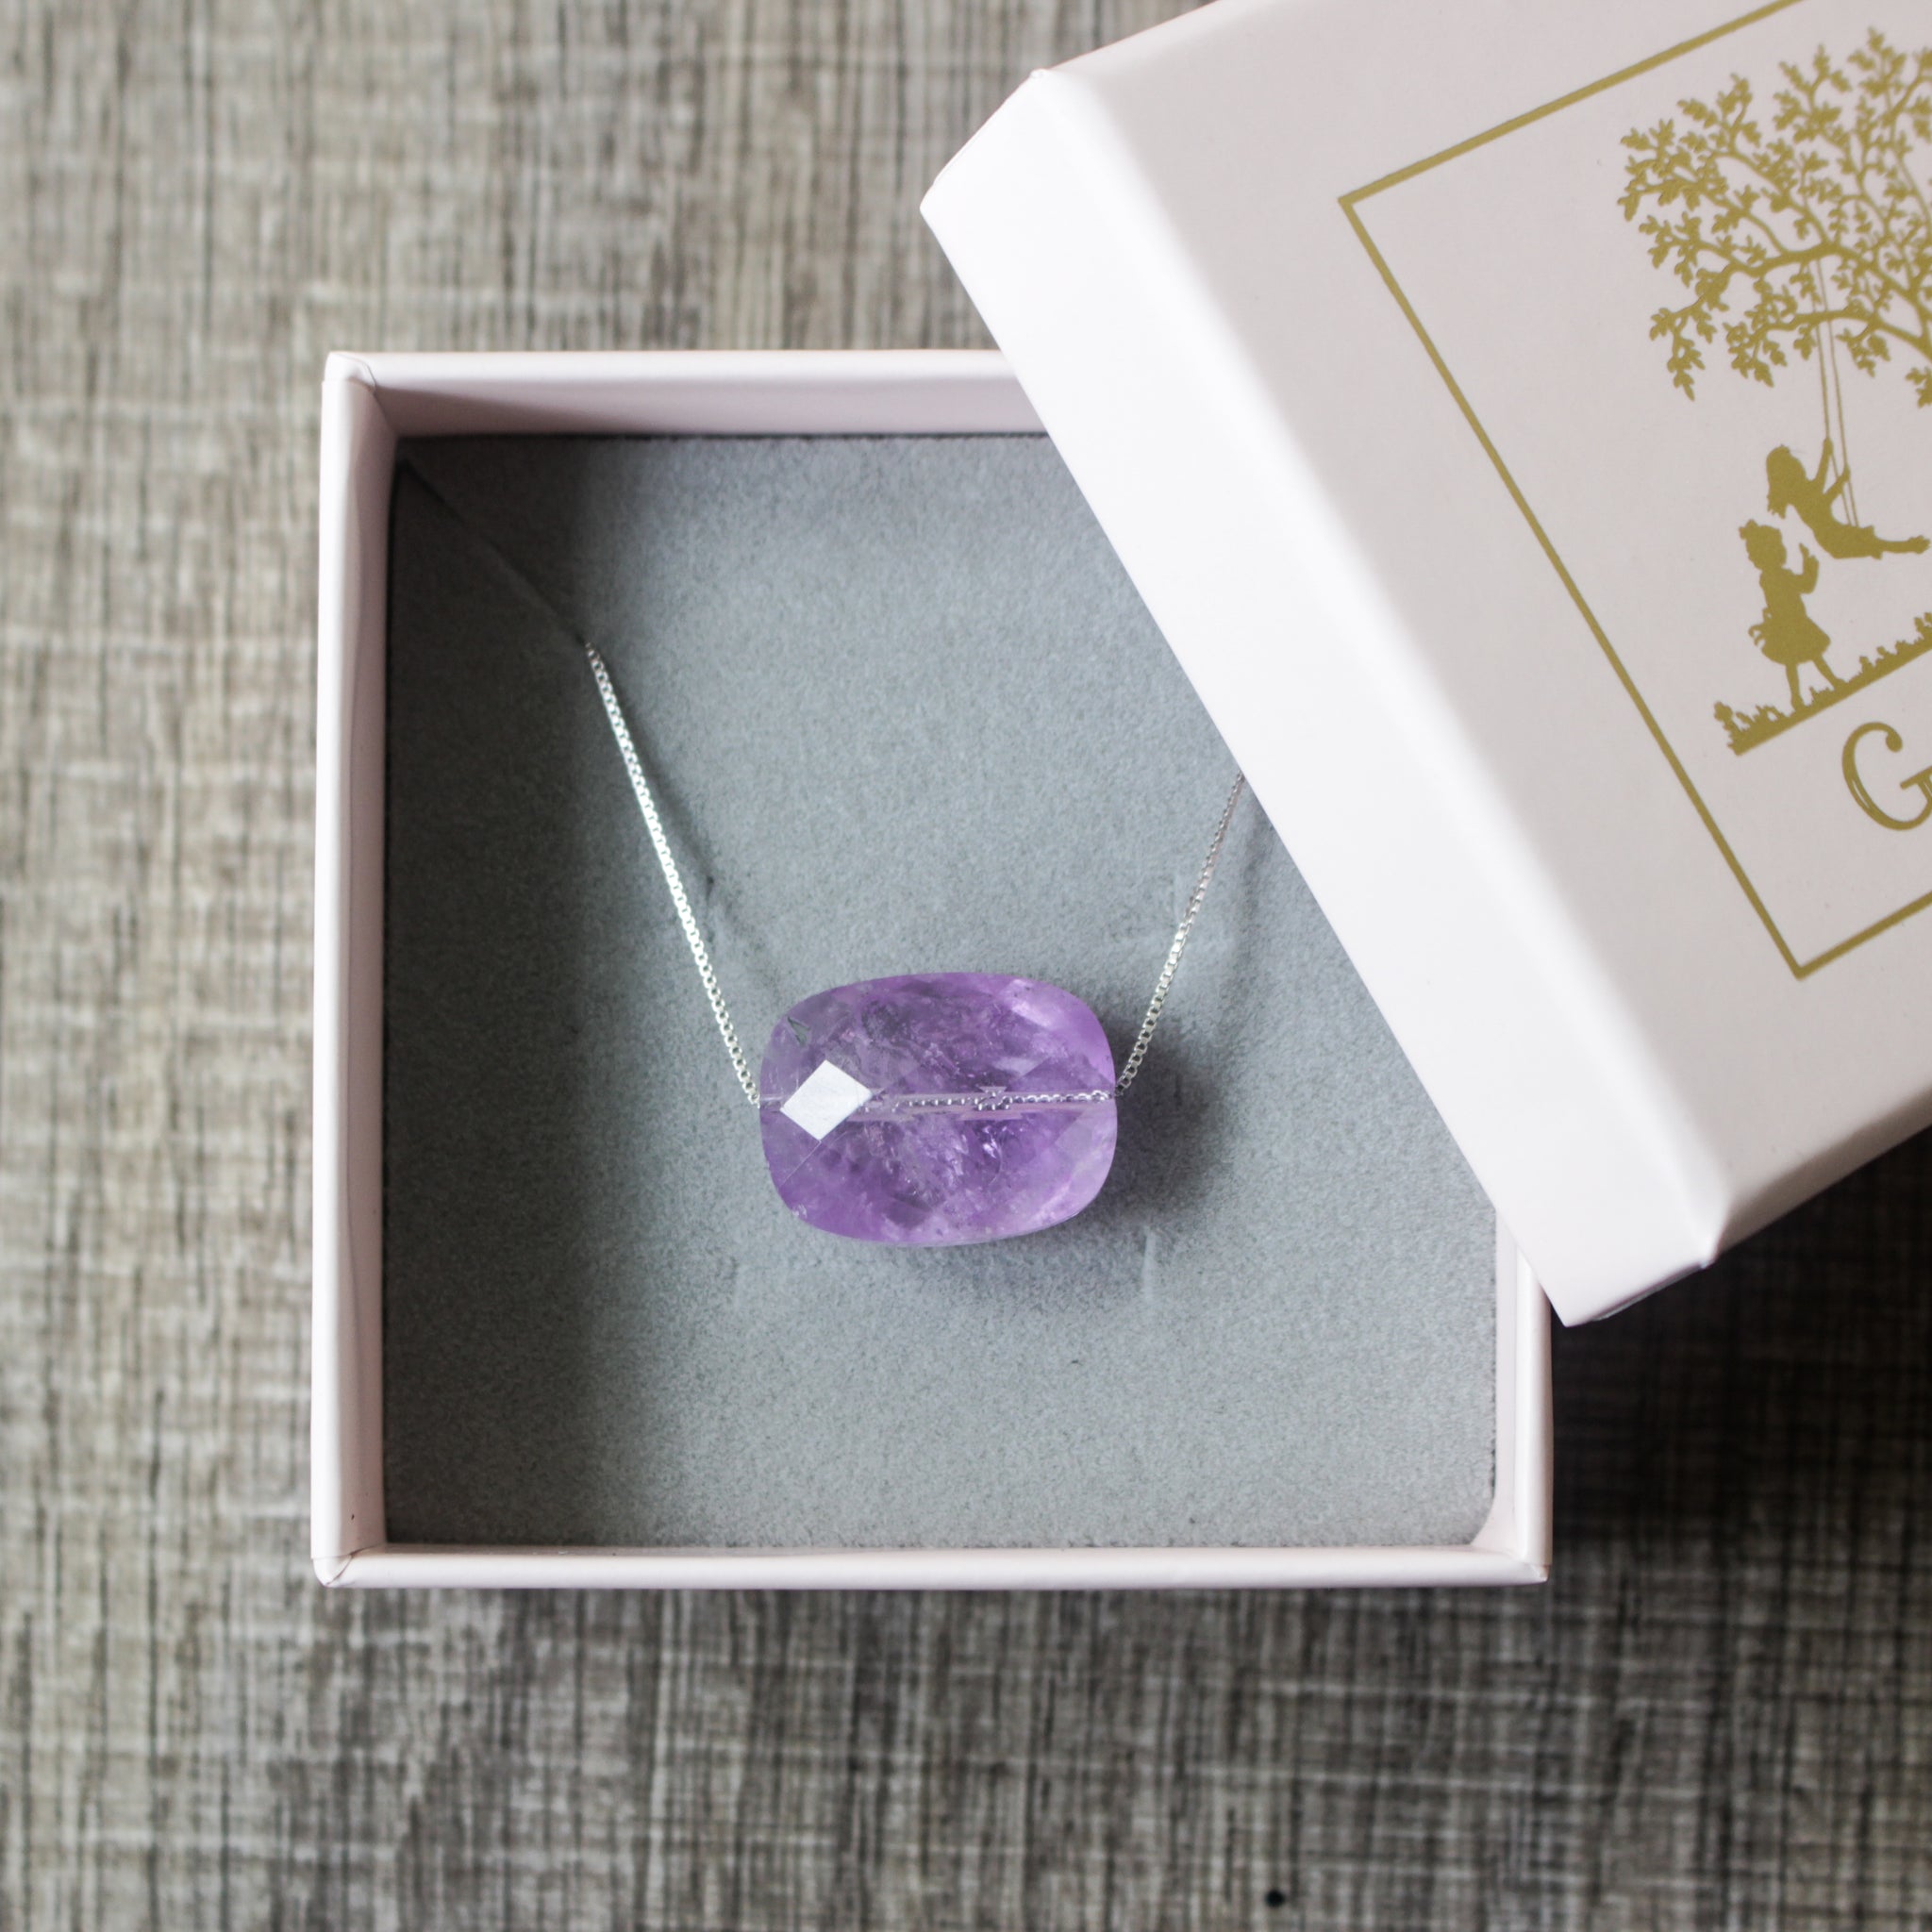 Rectangle Shaped Faceted Amethyst Necklace